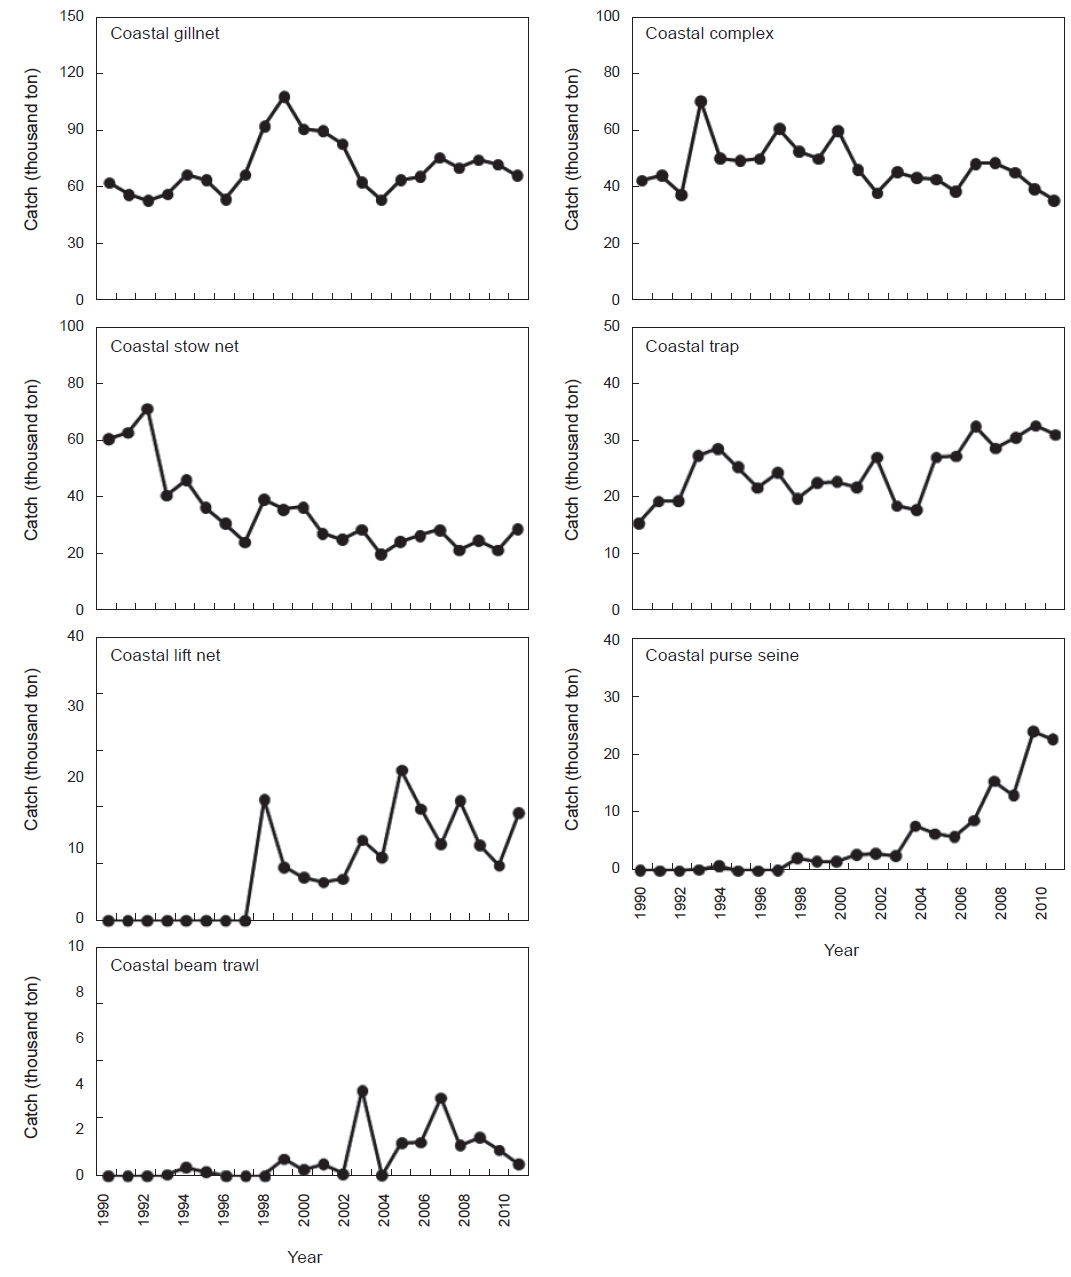 Variations in catch by coastal fisheries in Korean waters from 1990 to 2011.